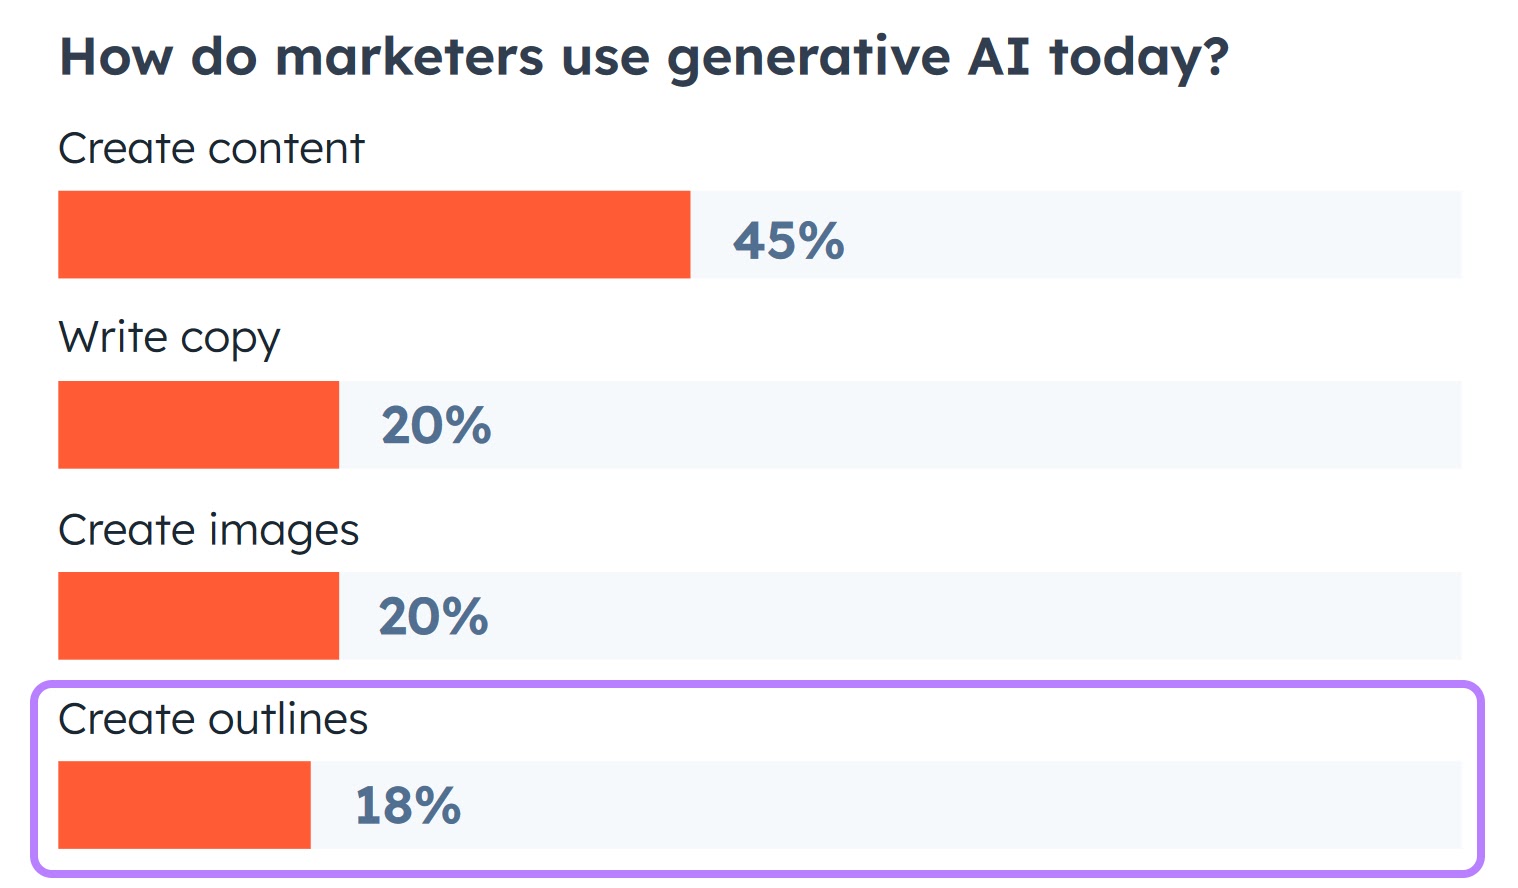 HubSpot research results for how marketers use generative AI